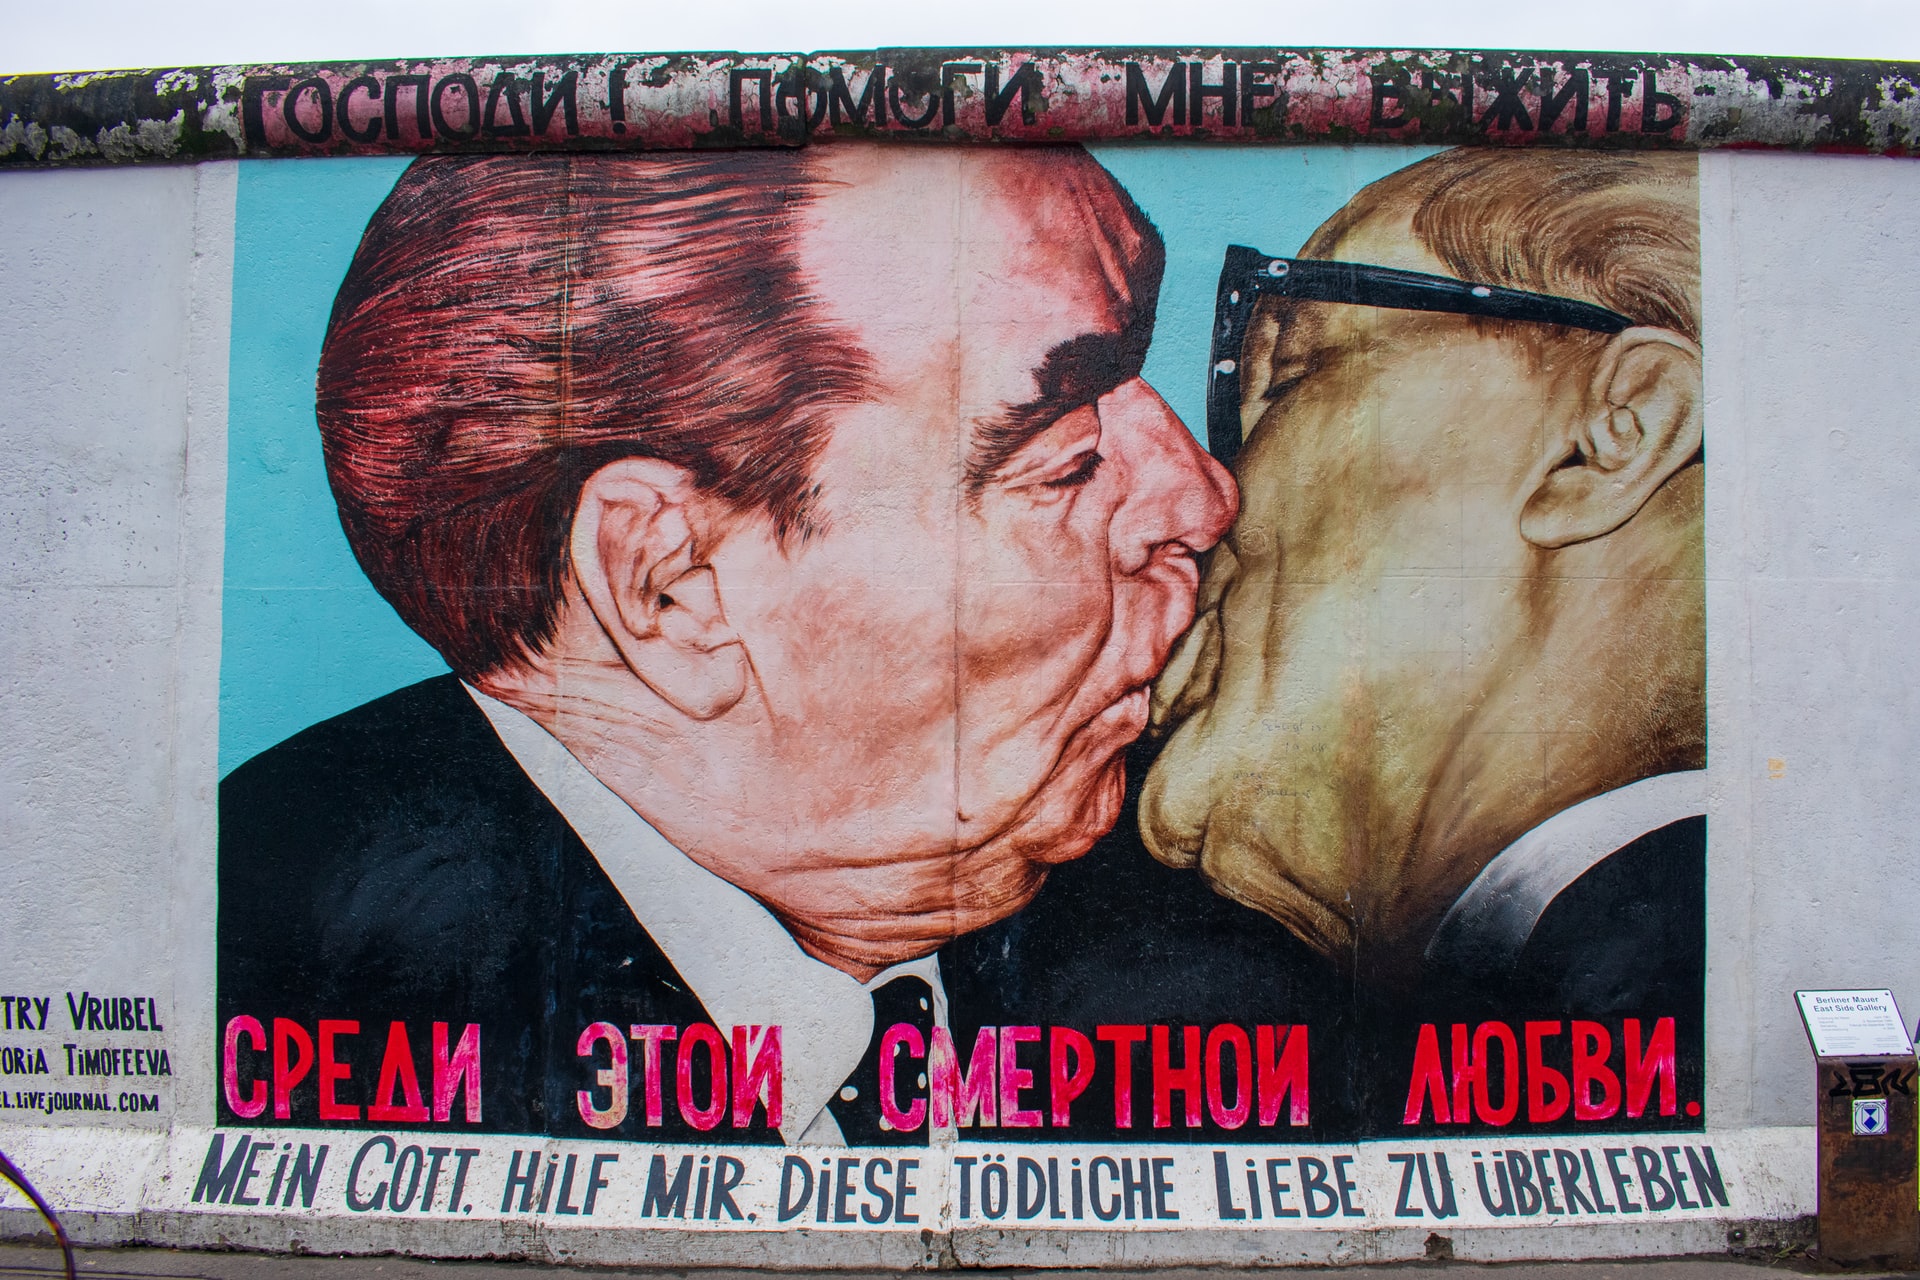 two-men-kissing-in-graffiti-street-art-at-the-east-side-gallery